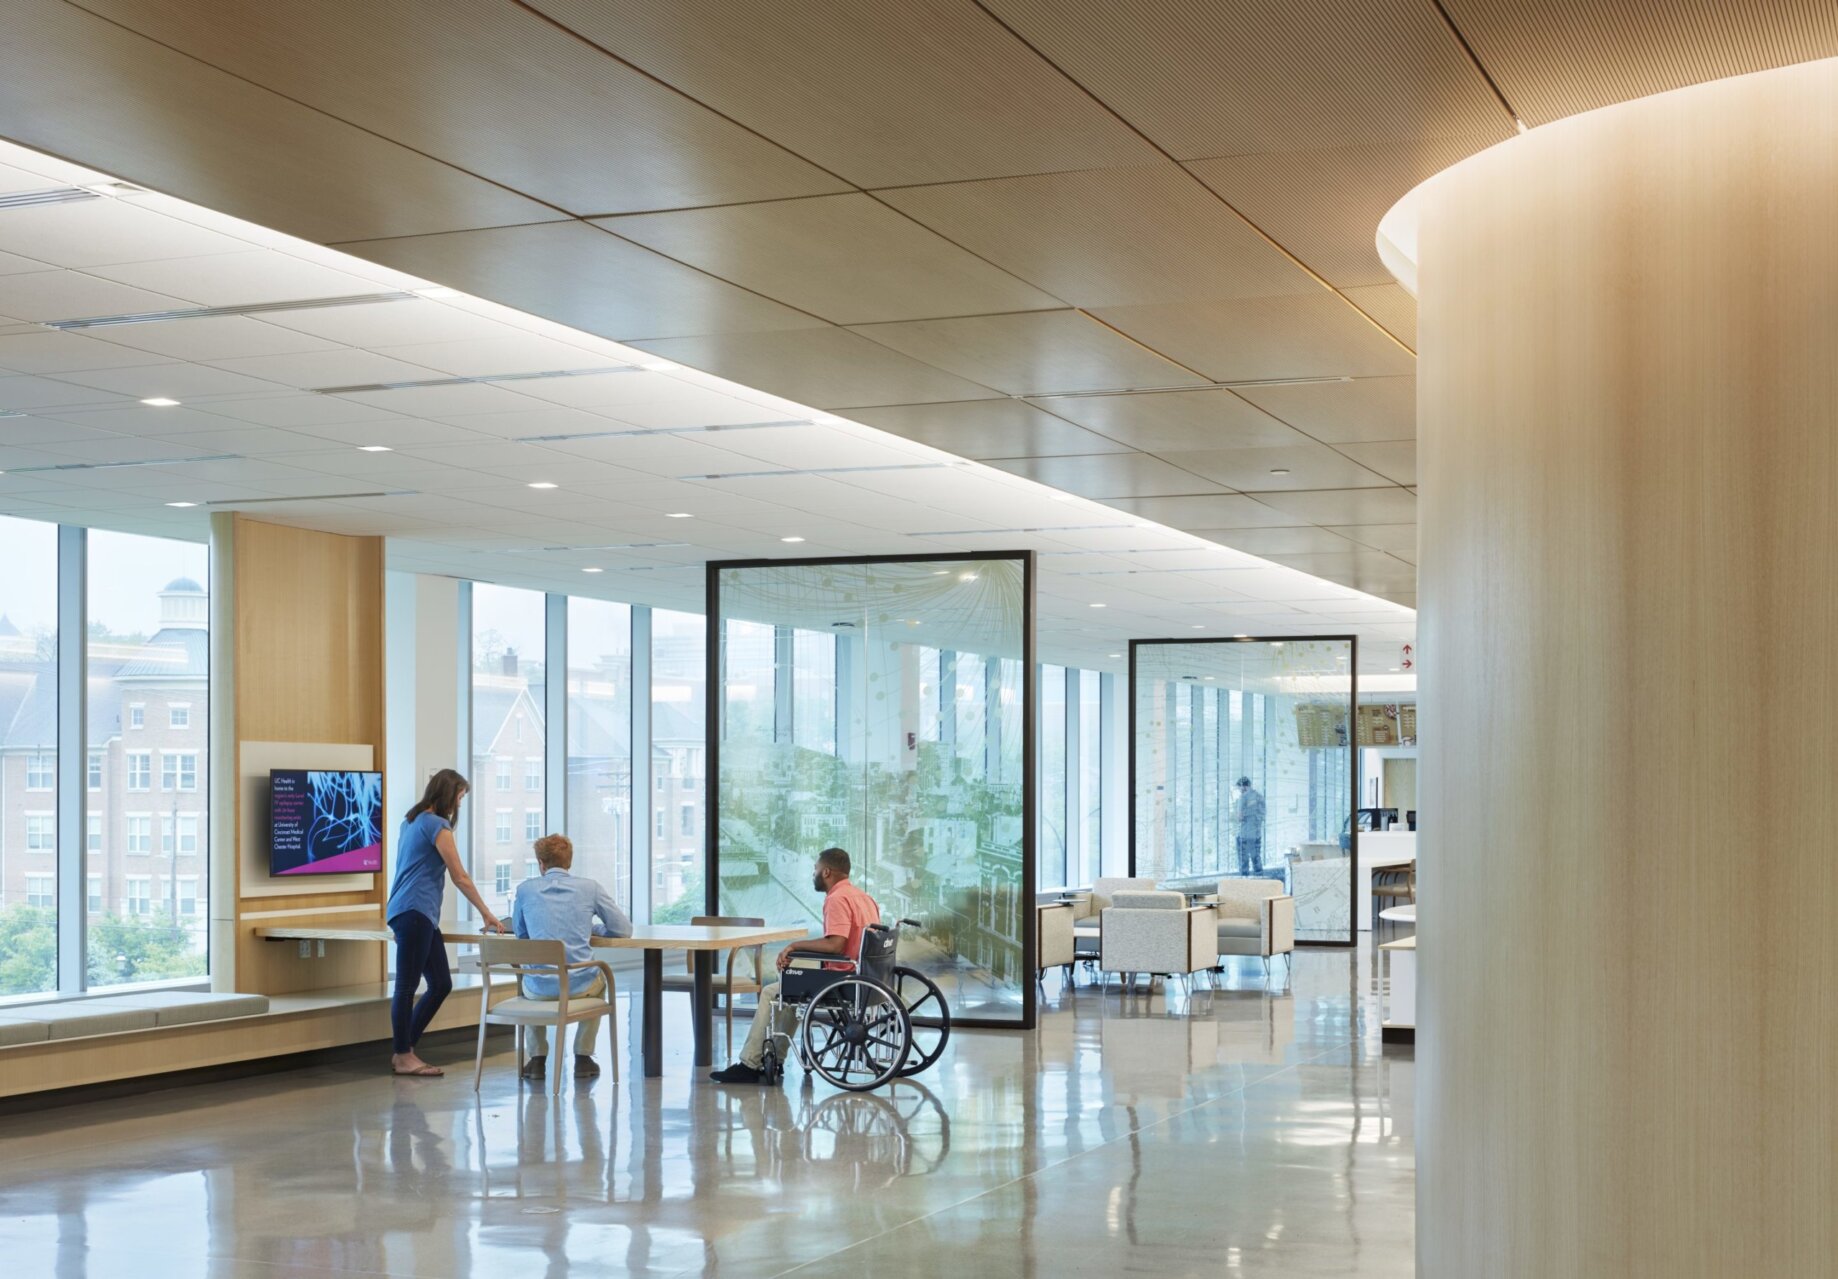 University of Cincinnati Gardner Neurological Institute. Main lobby that contains multi use areas for learning and waiting, museum, café, and classrooms. The spaces are divided by glass panels that contain artwork of the local culture of Cincinnati.